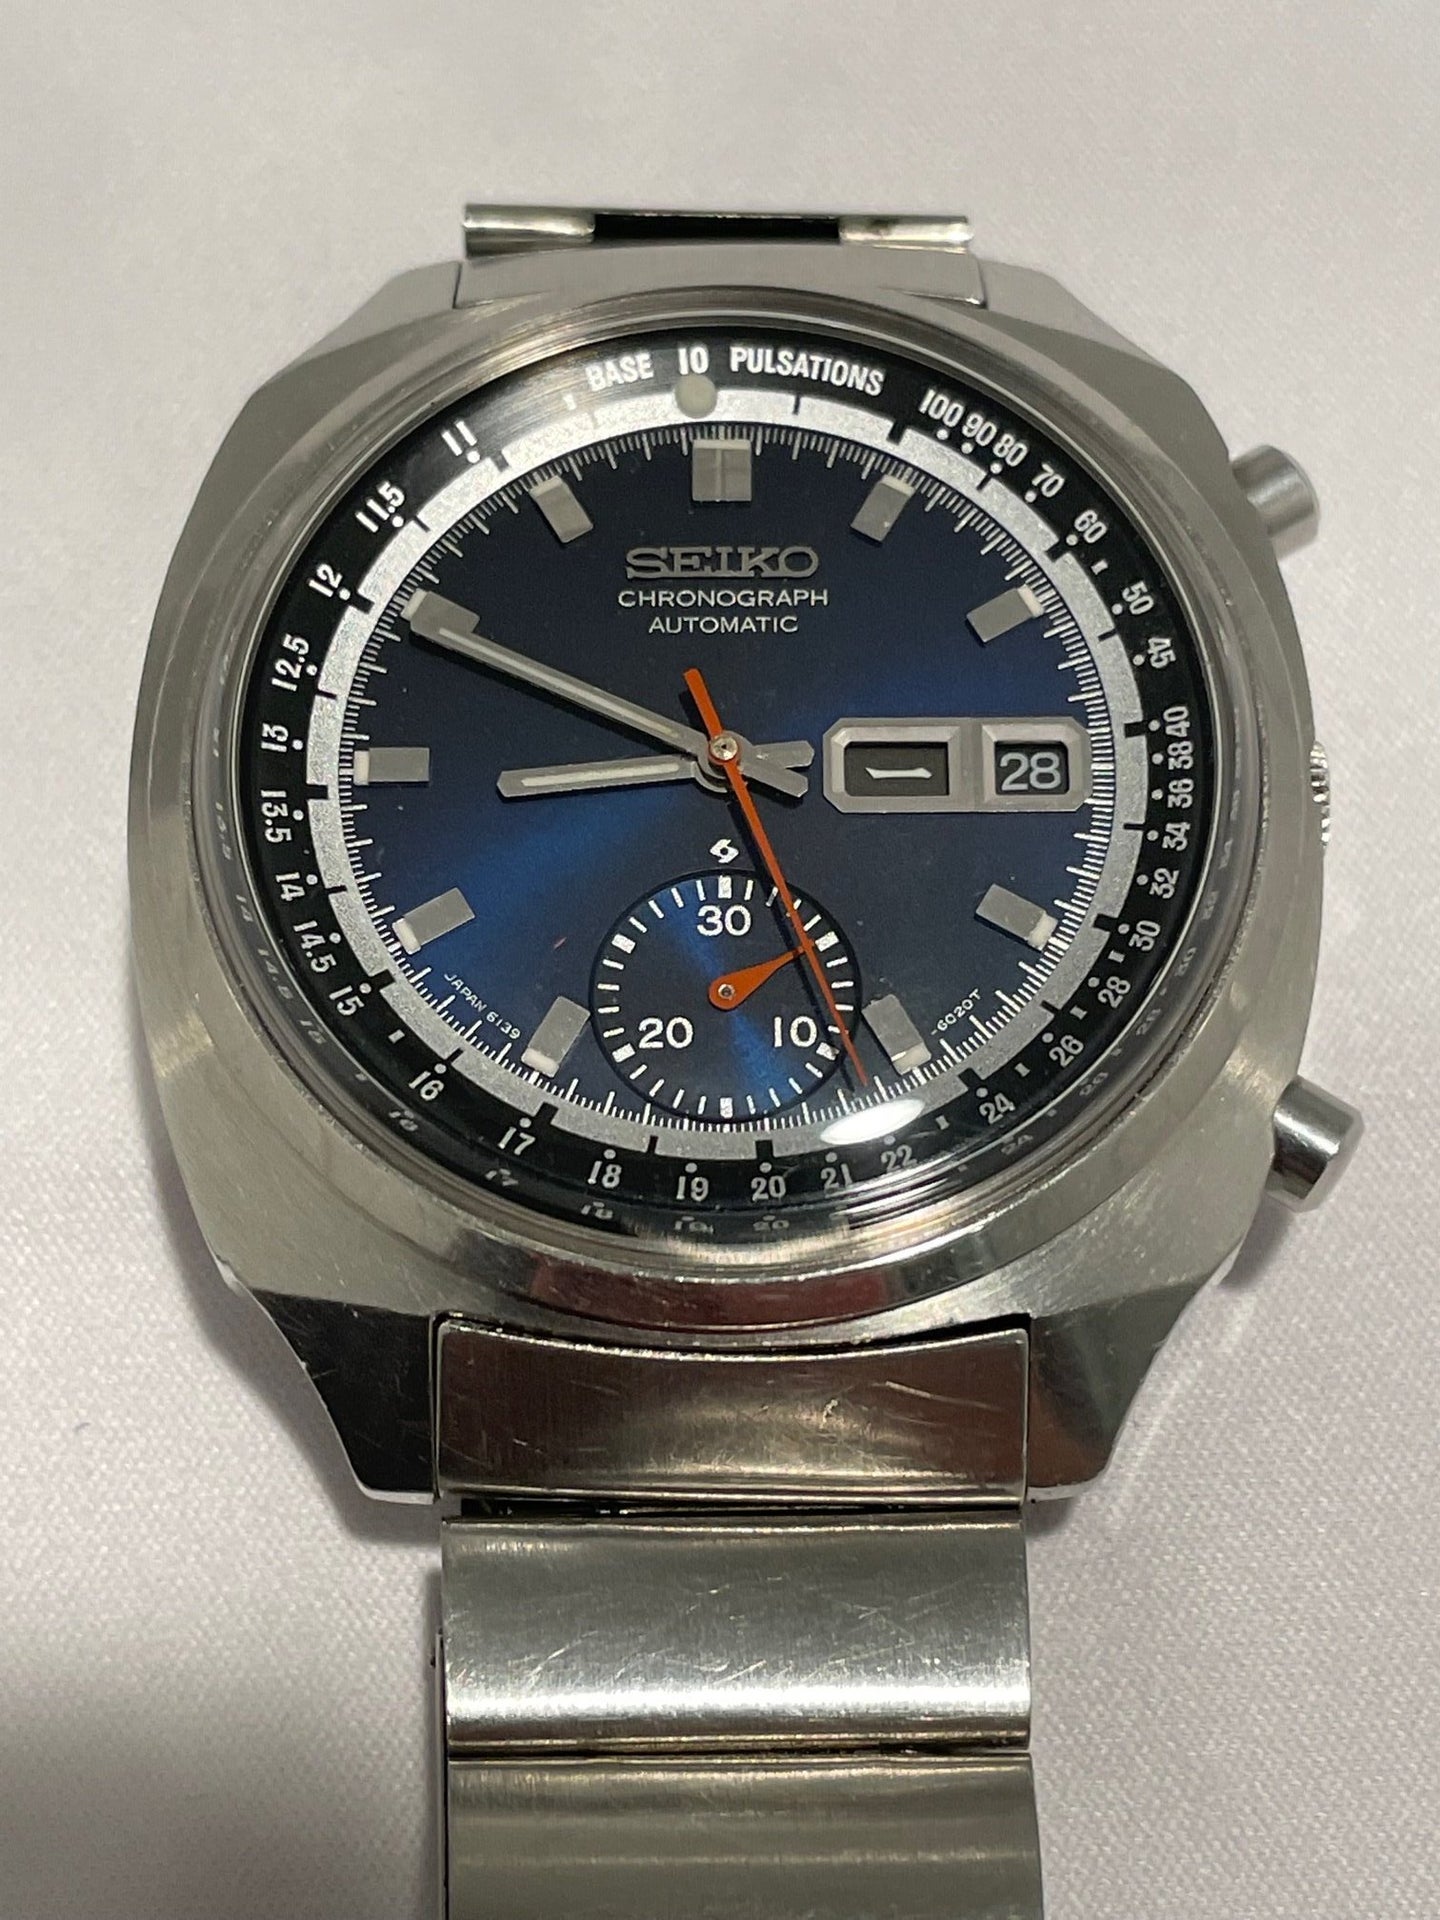 SOLD: 1969 Seiko 6139-6020 Chronograph Pulsations - Blue Dial - $850 |  WatchUSeek Watch Forums